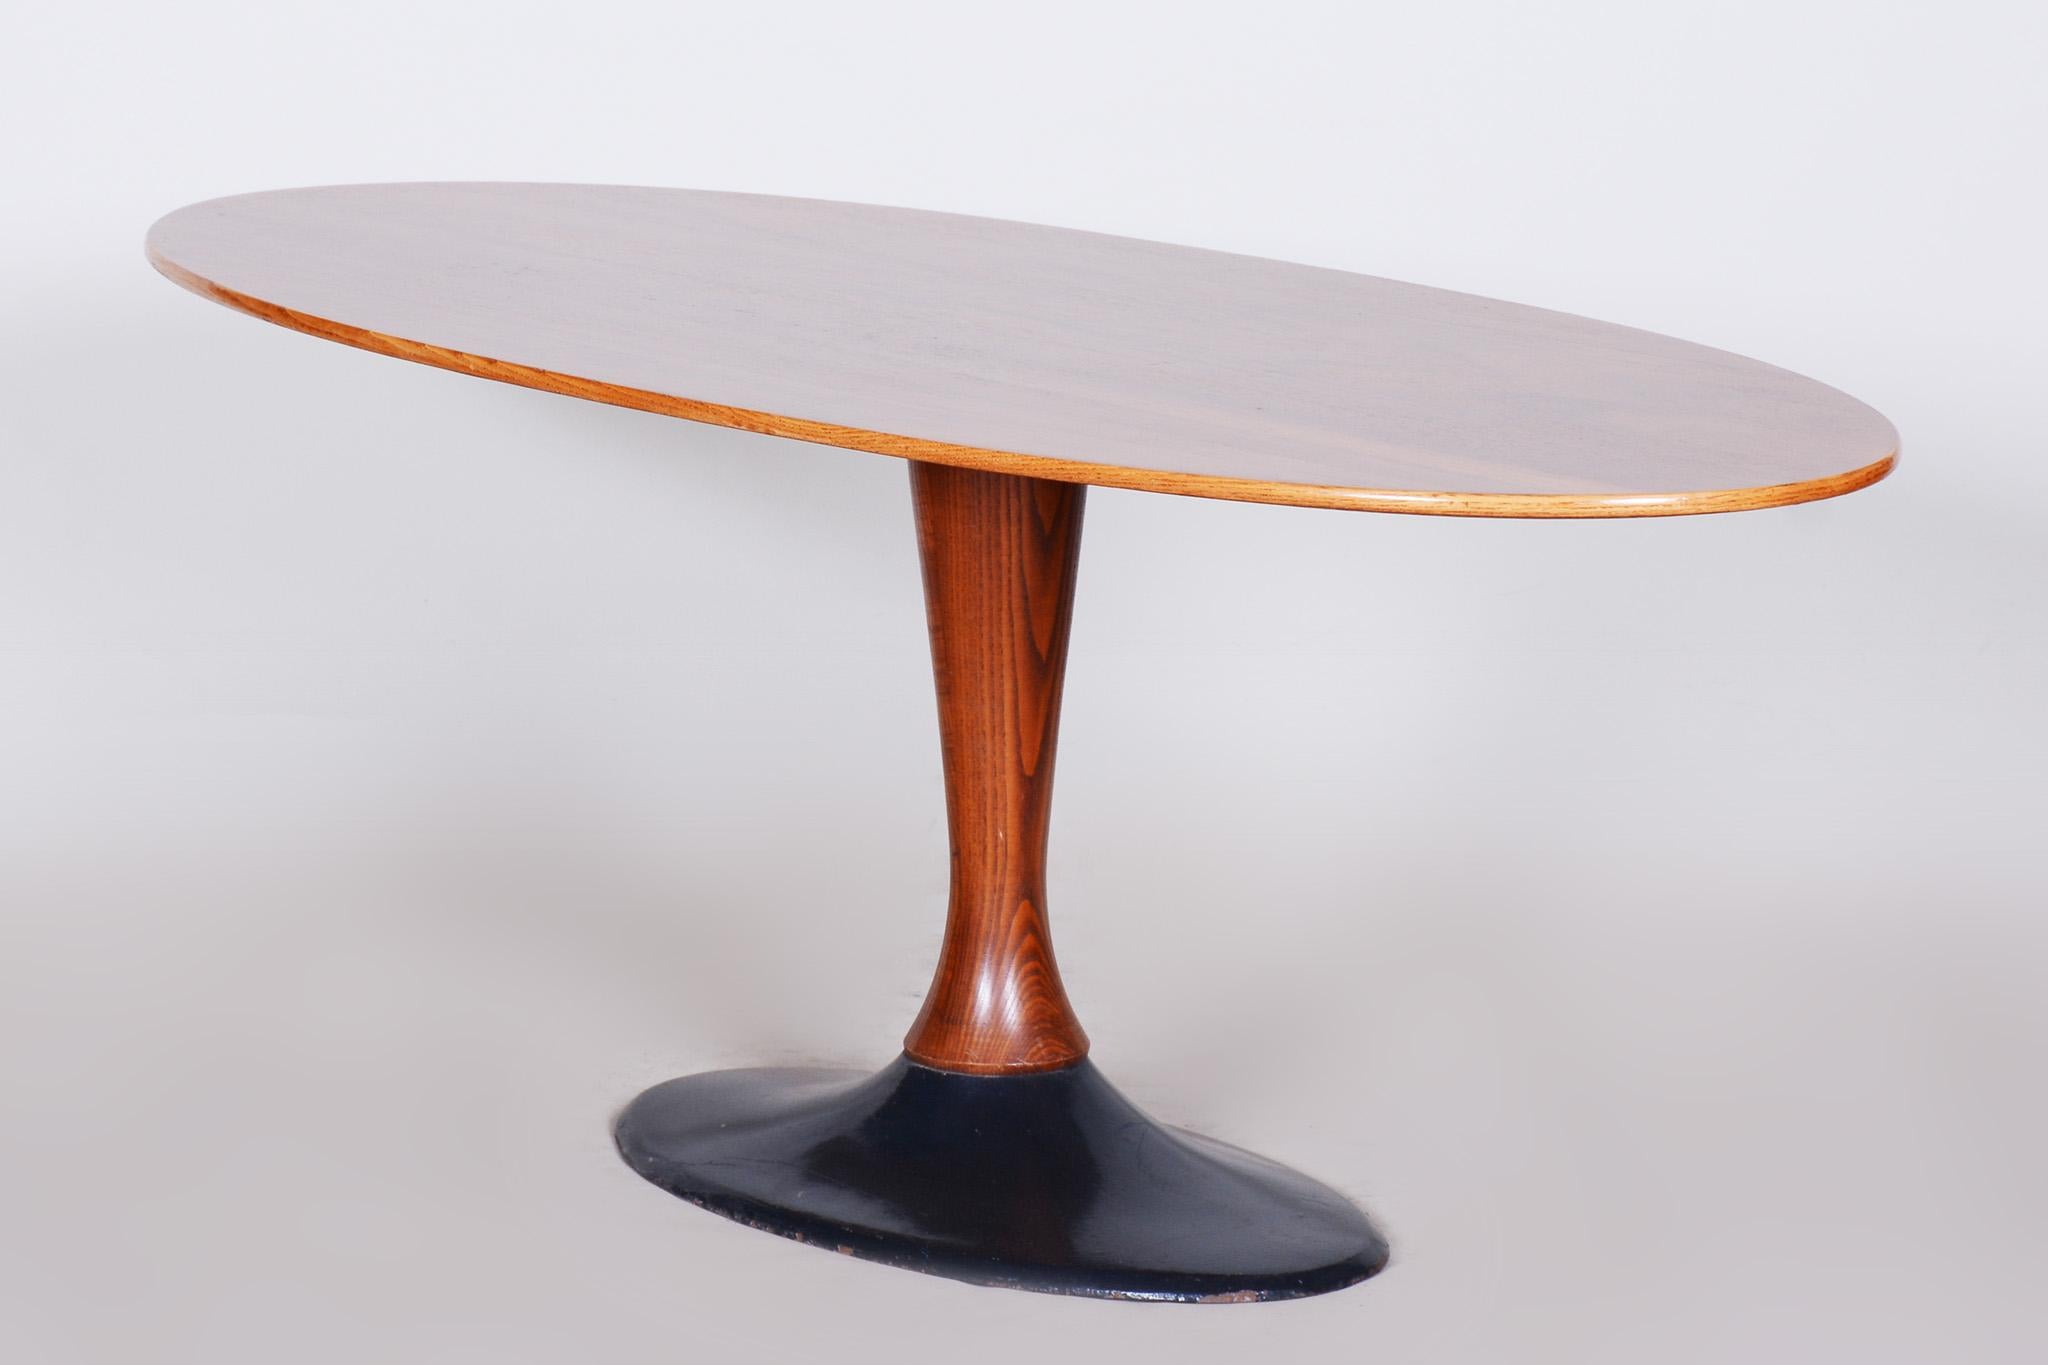 Czech Mid-Century Rosewood Oval Table with Cast Iron Base, 1950s For Sale 2